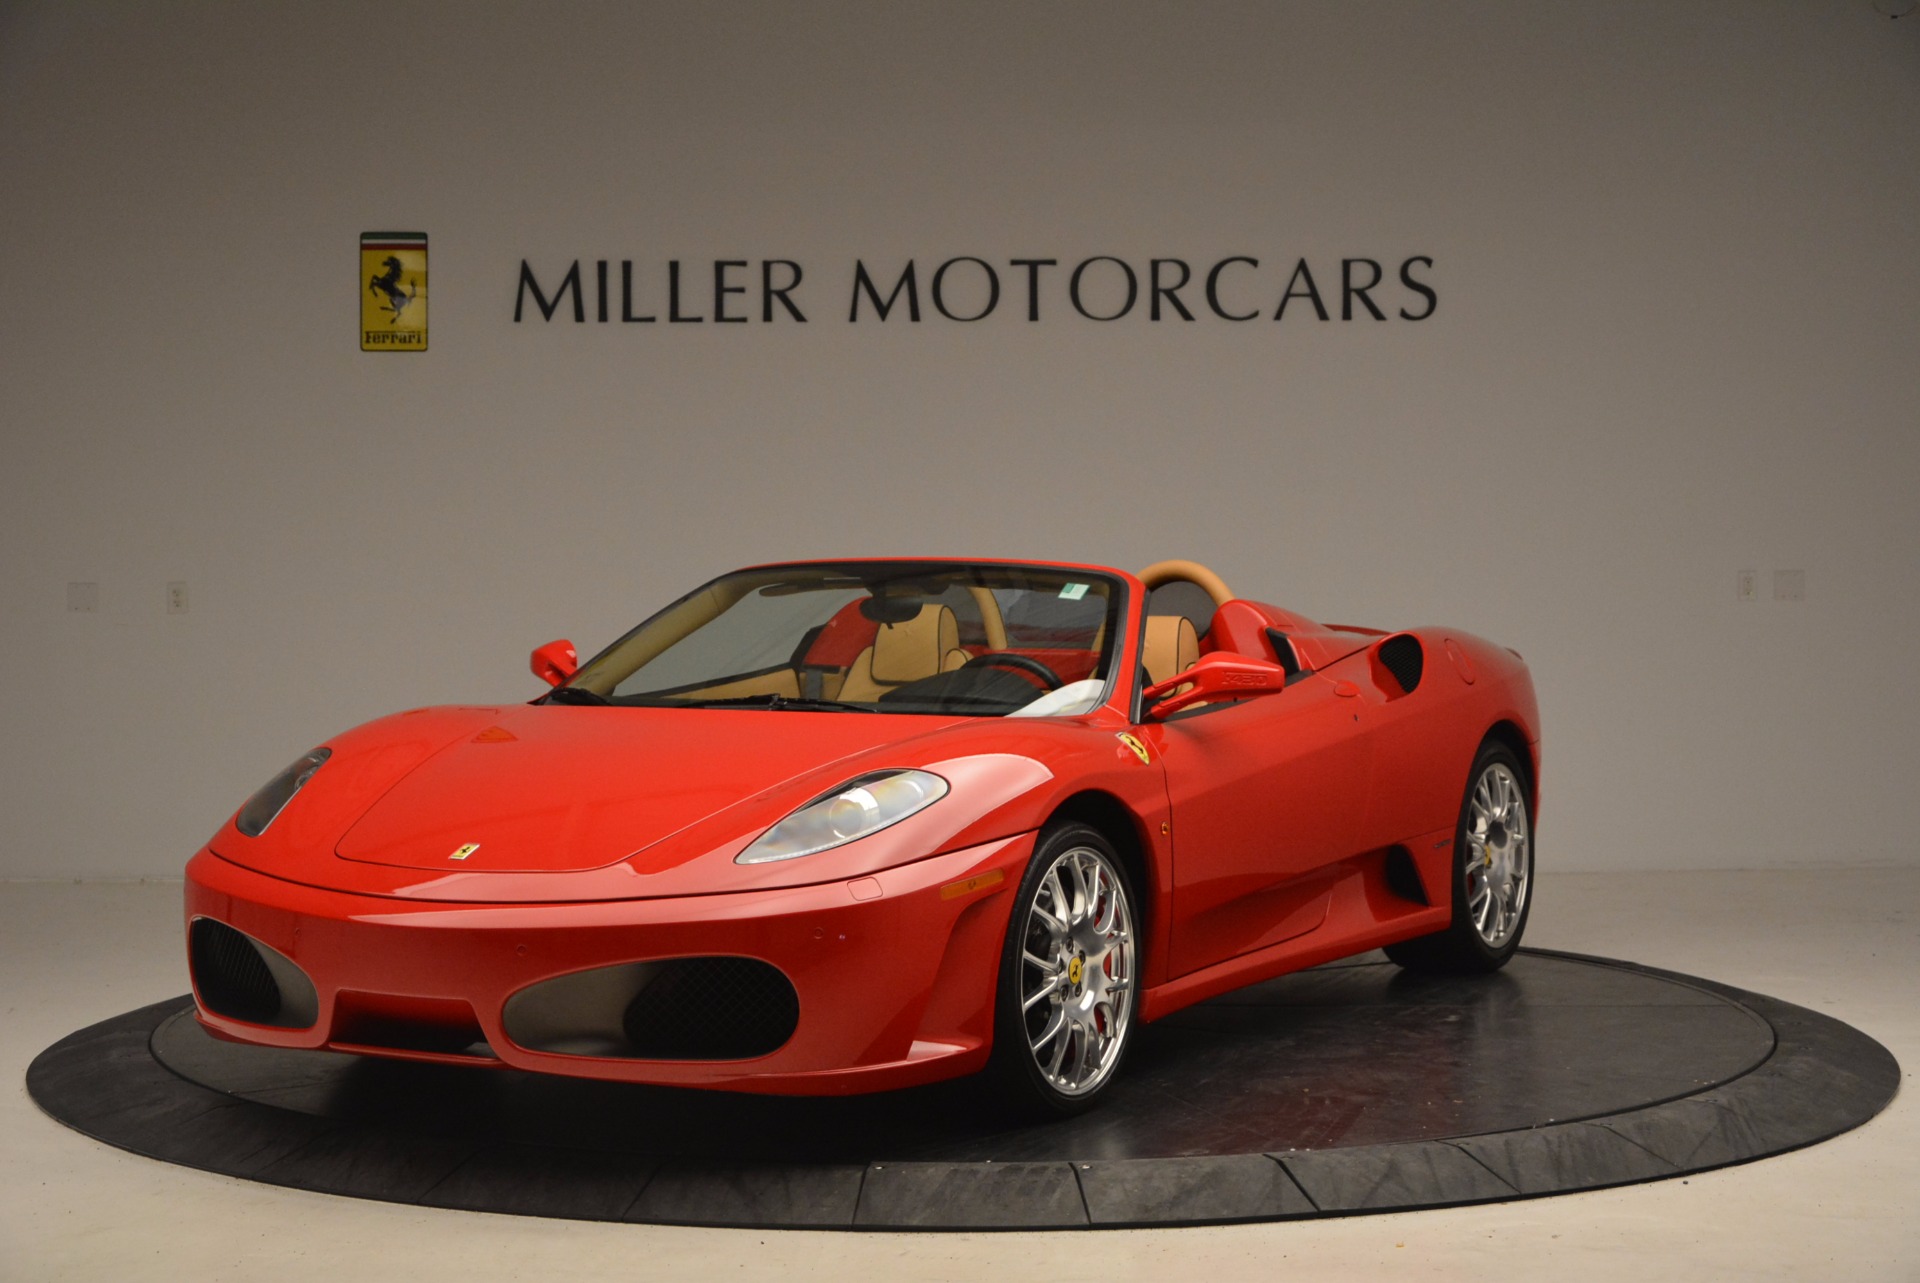 Used 2008 Ferrari F430 Spider for sale Sold at Pagani of Greenwich in Greenwich CT 06830 1